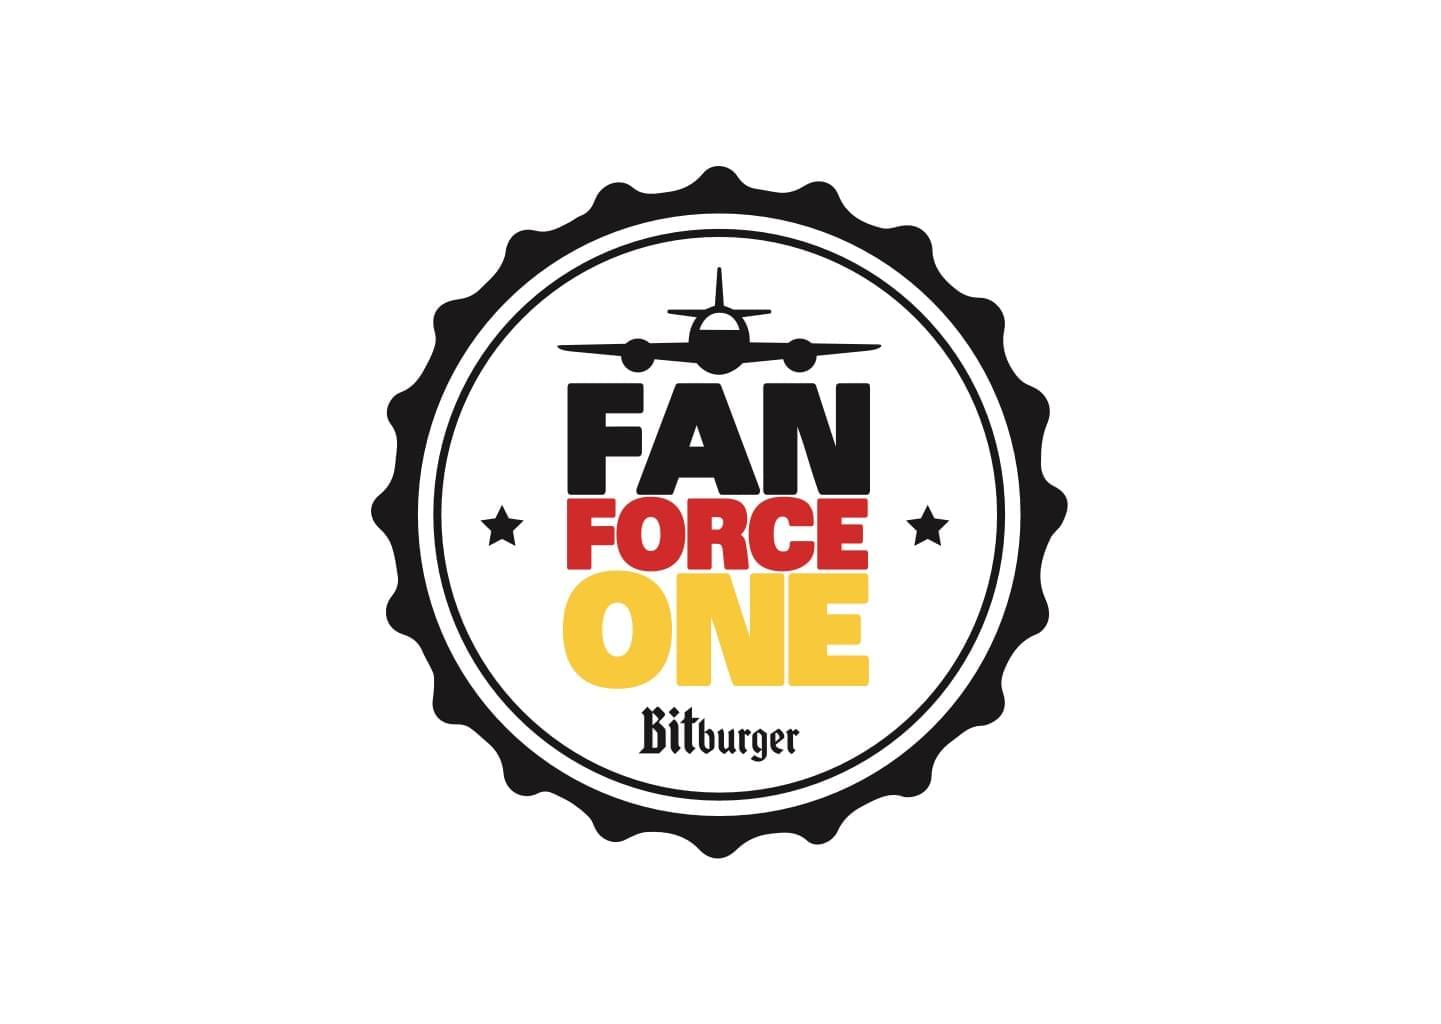 The keyvisual shows a stylized plane and the words FAN FORCE ONE representing the national colours of the German flag.